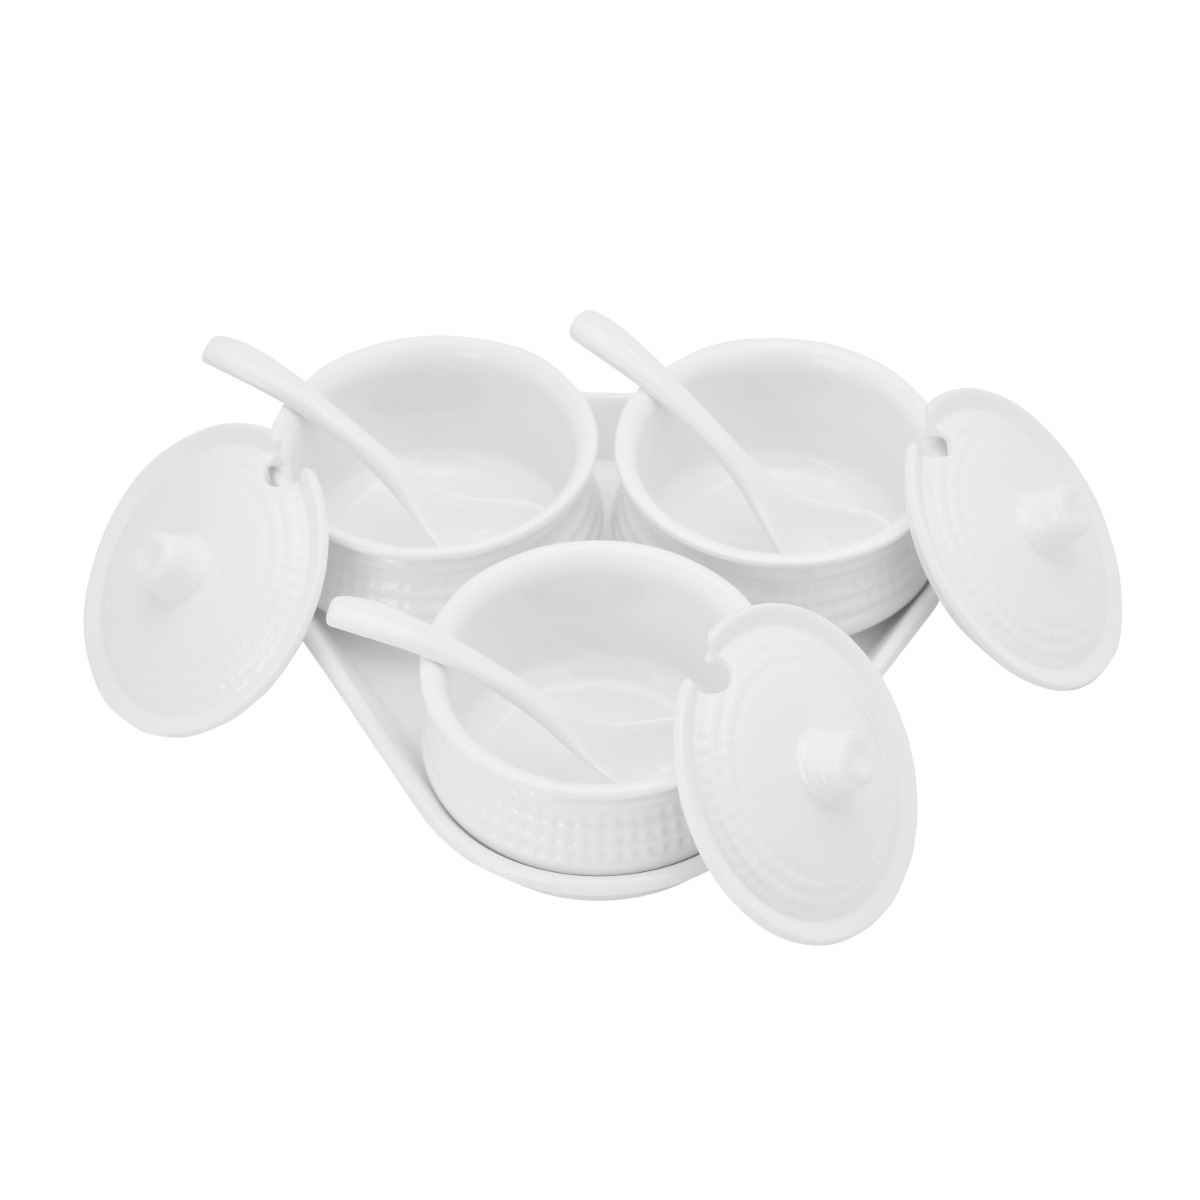 Dinewell Melamine Pickle Serving Tray White